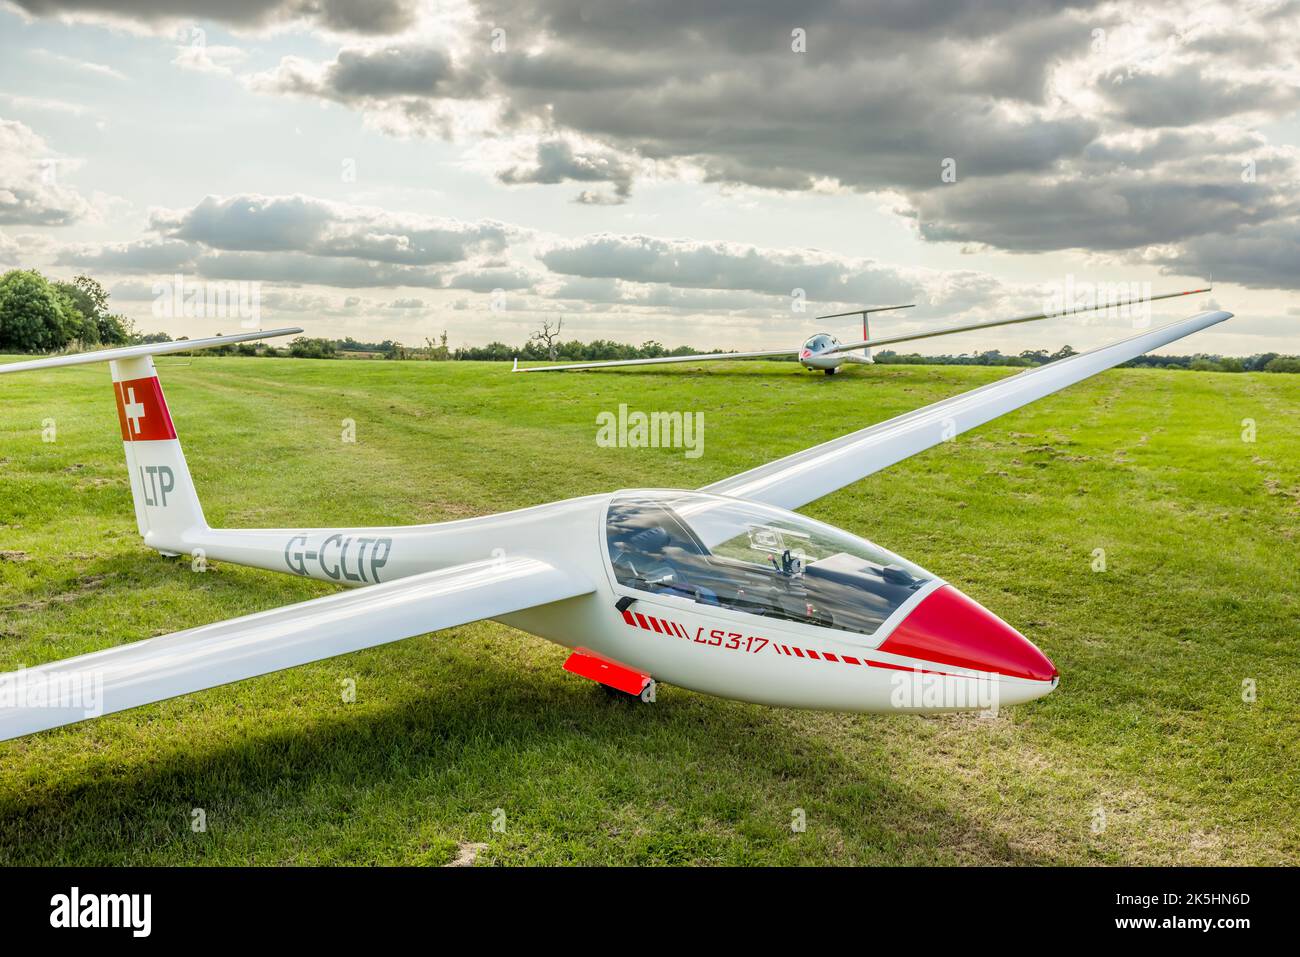 BUCKINGHAMSHIRE, UK - August 24, 2021. Glider parked on a grass airfield. Gliders or sailplanes. Stock Photo